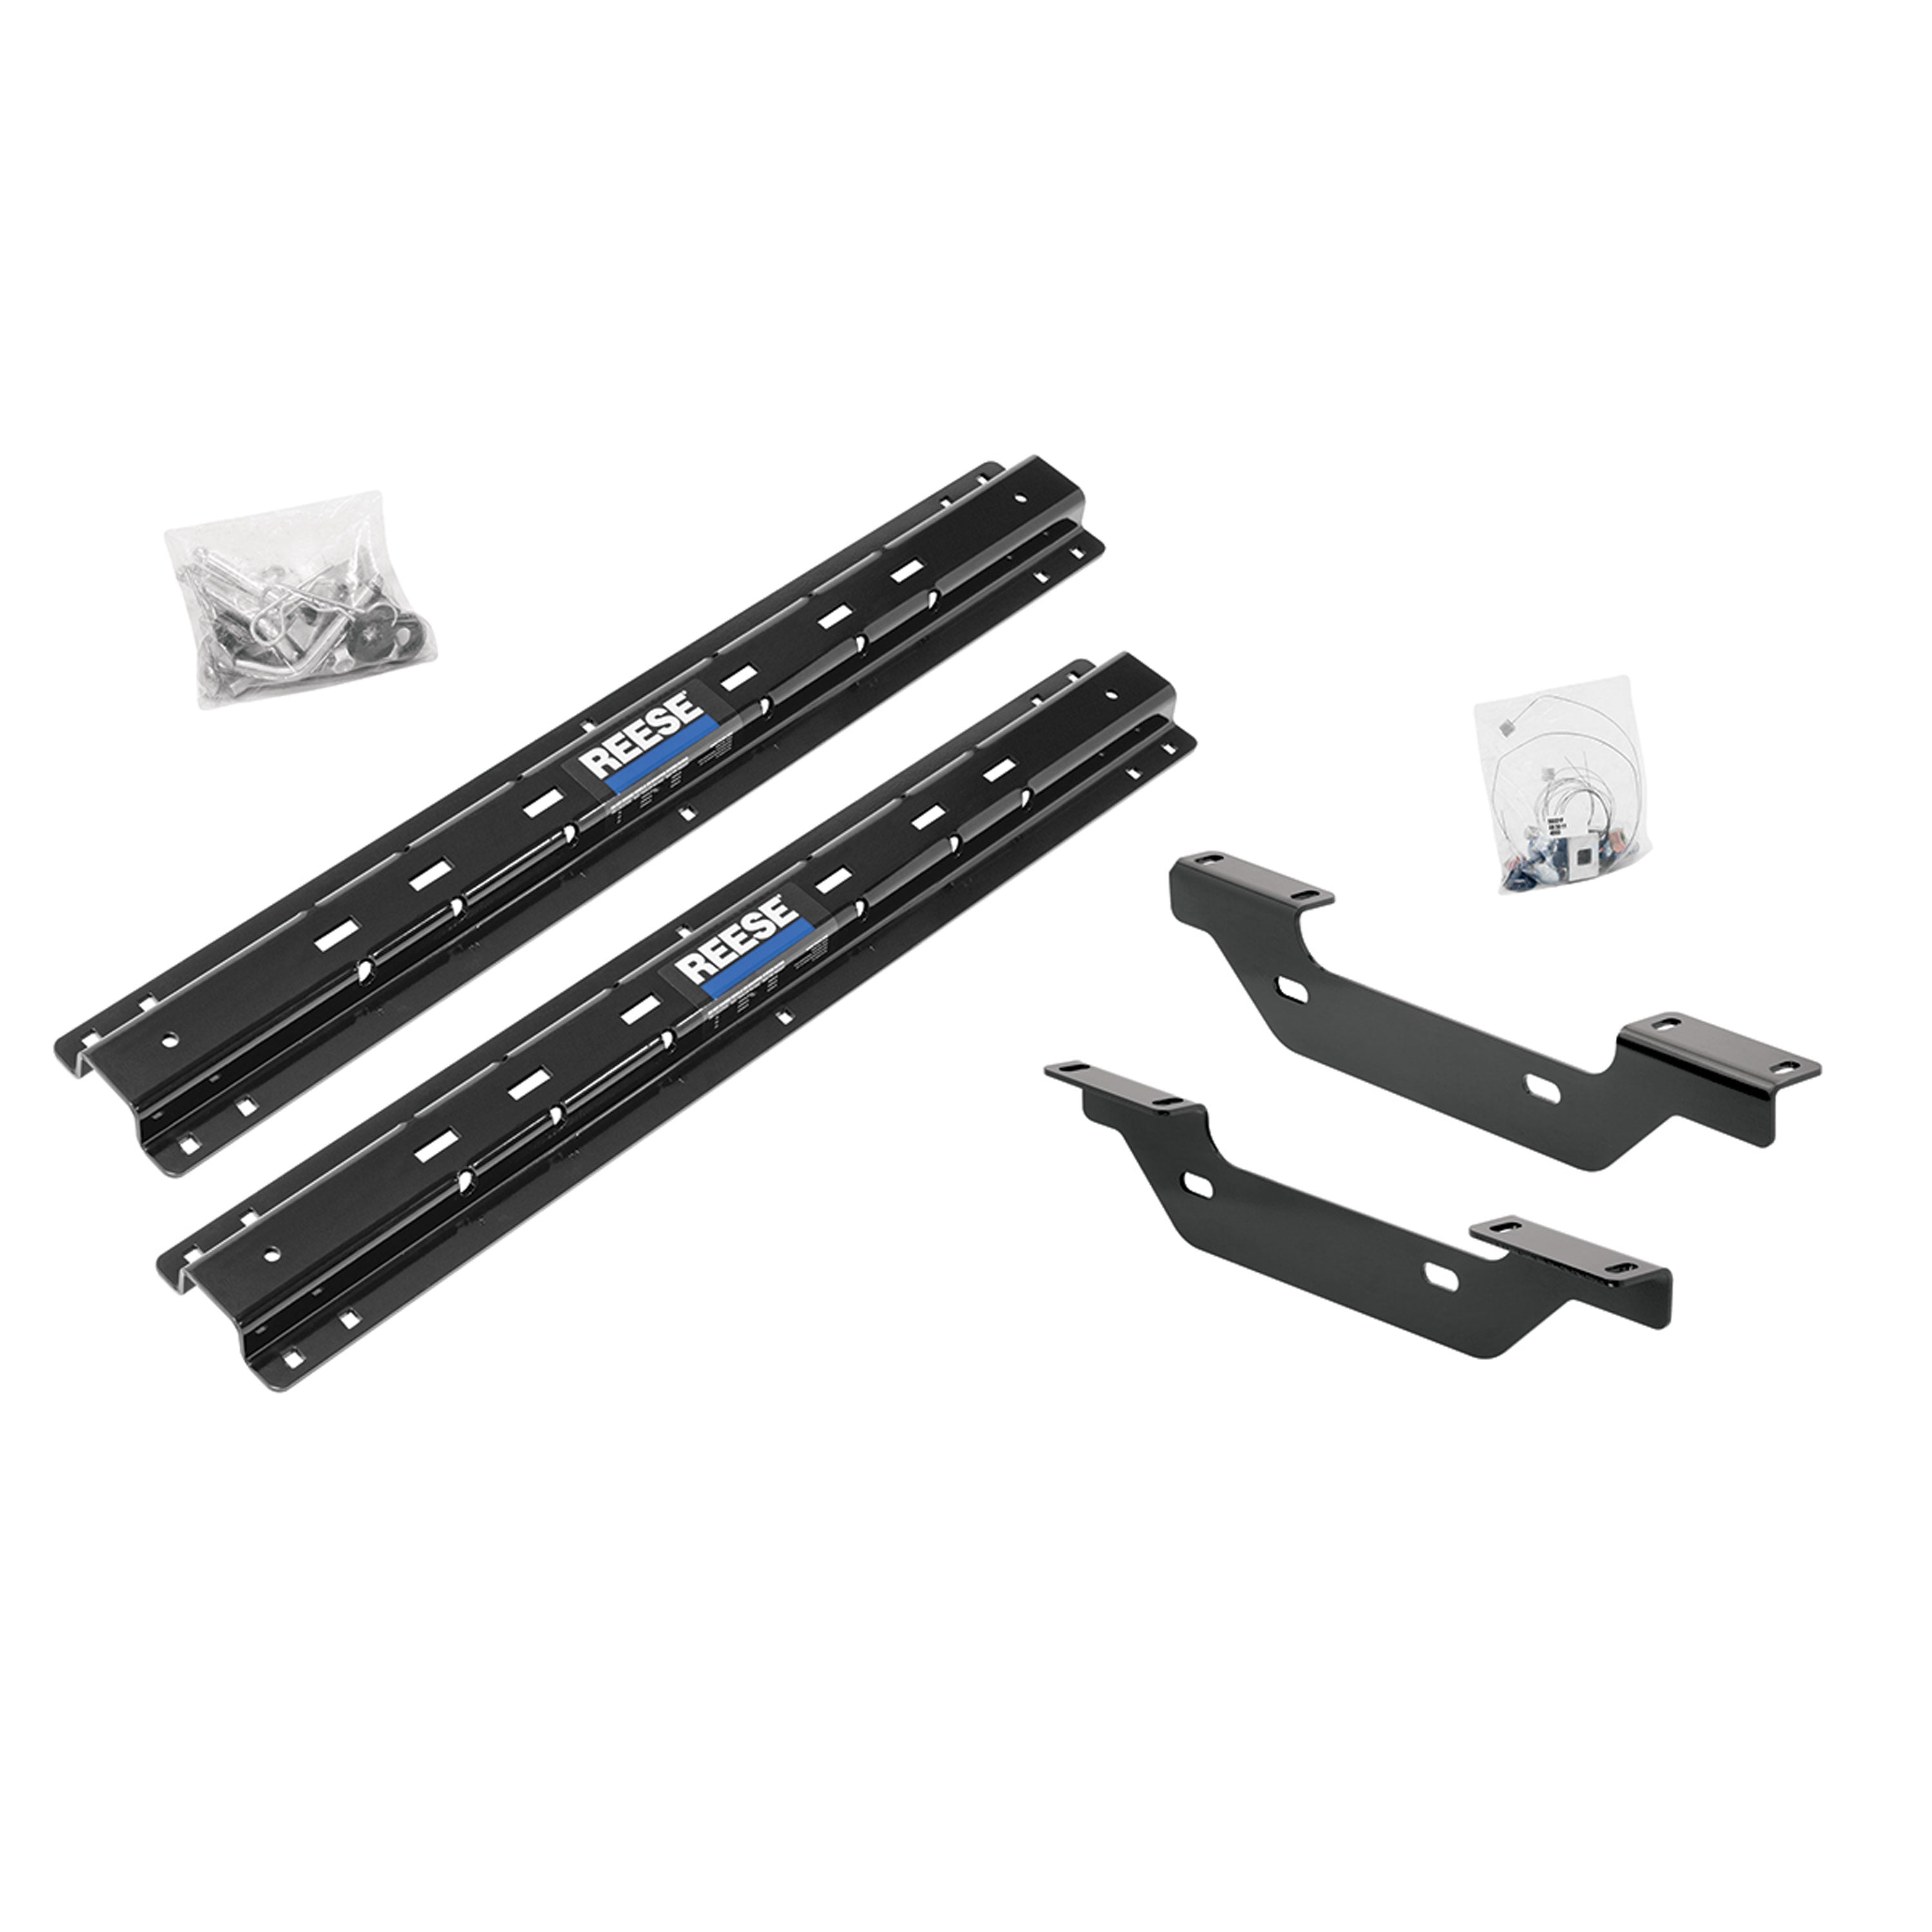 Reese 56001-53 Outboard Fifth Wheel Rail and Bracket Kit for '11-'14 Chevy/GMC 2500/3500HD - 10 Bolt